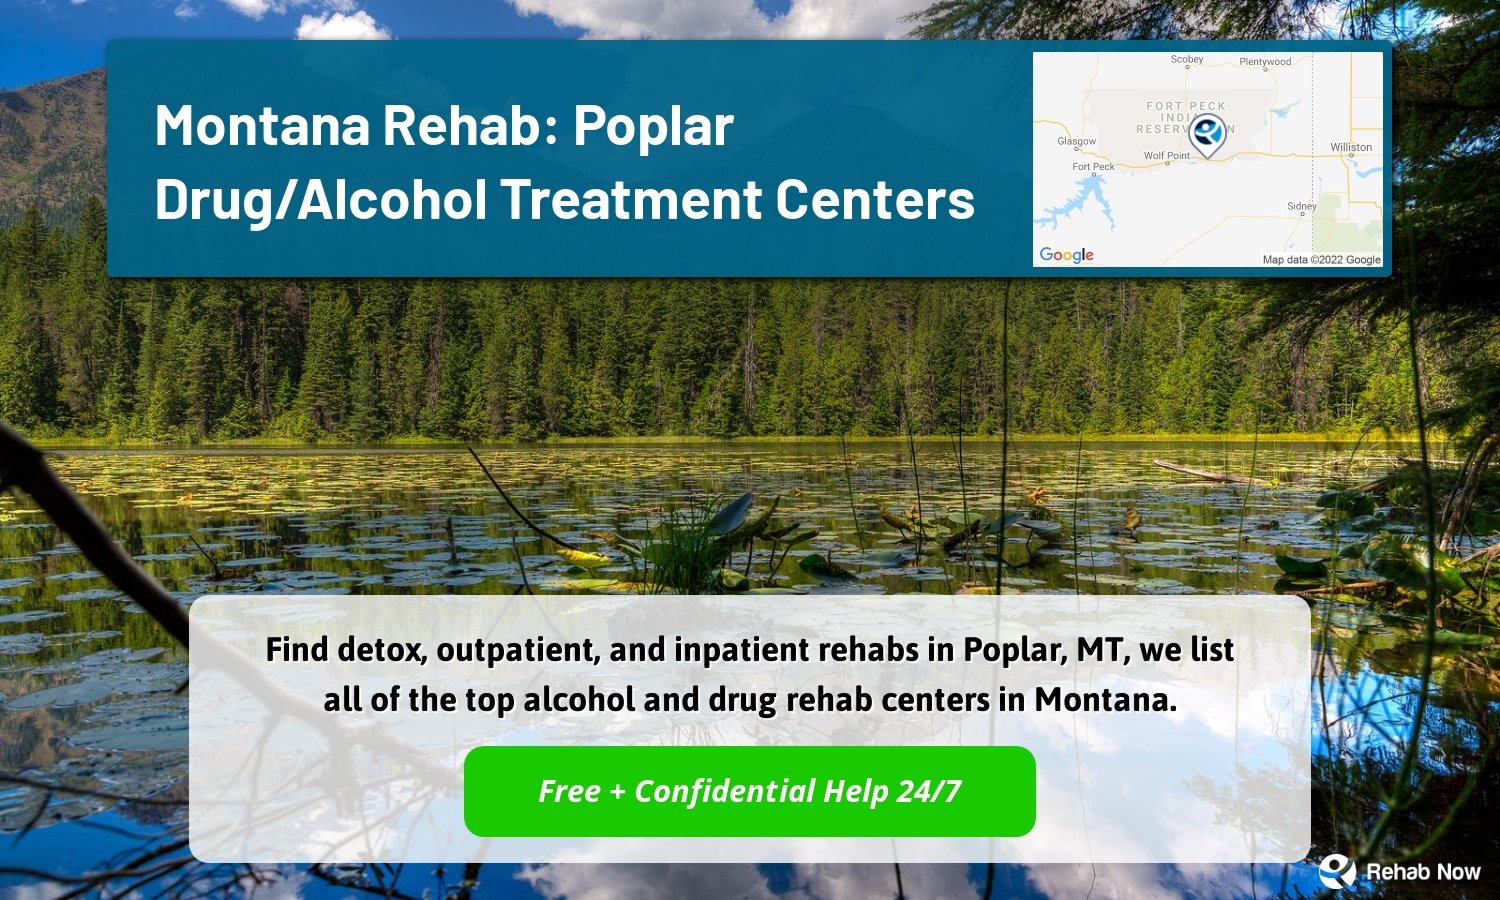 Find detox, outpatient, and inpatient rehabs in Poplar, MT, we list all of the top alcohol and drug rehab centers in Montana.